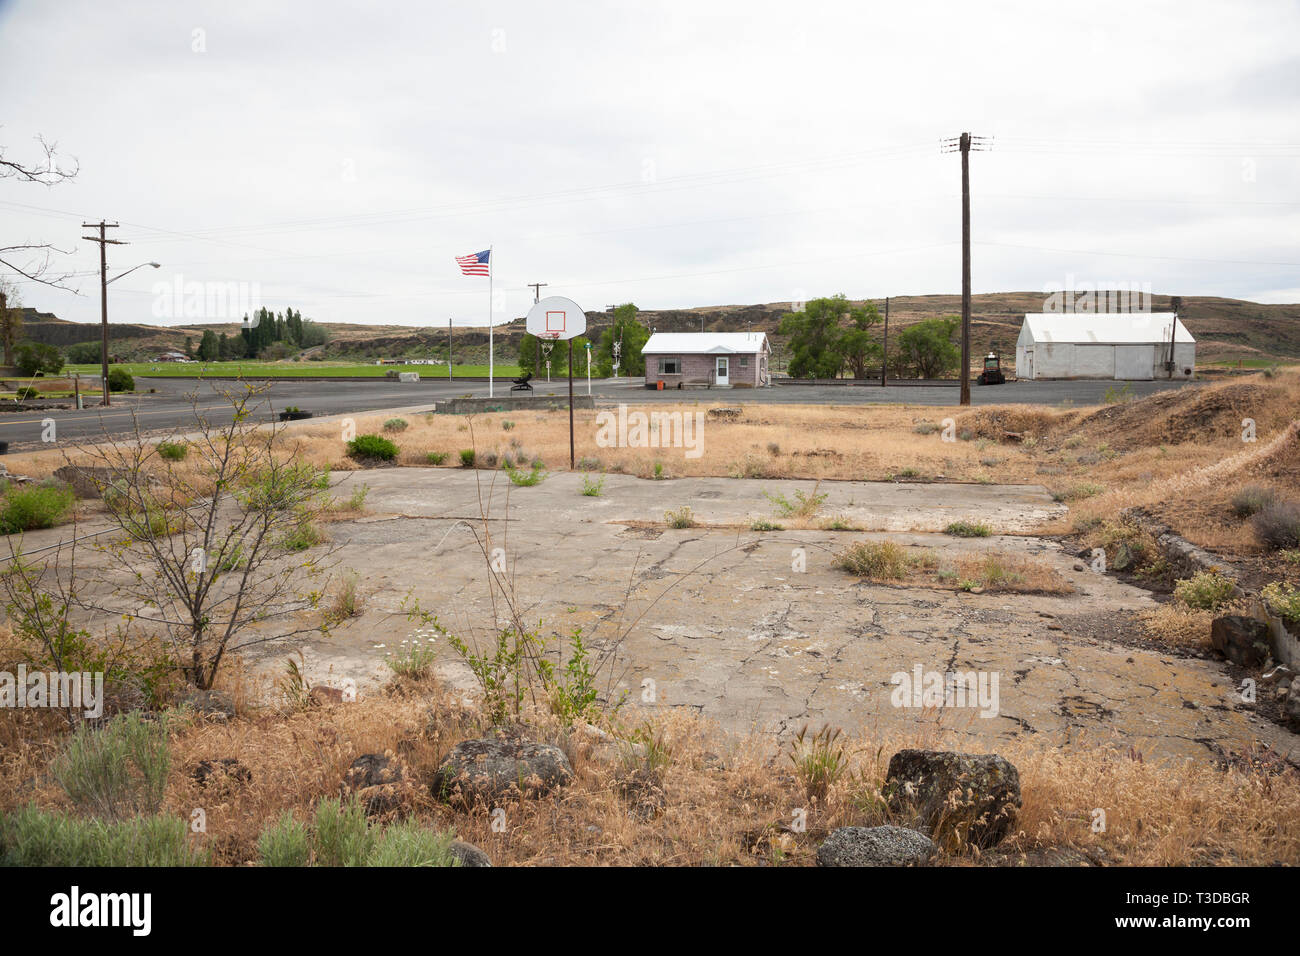 Abandoned basketball court in a rural American small town. Economic decline in poor areas of the United States. Stock Photo